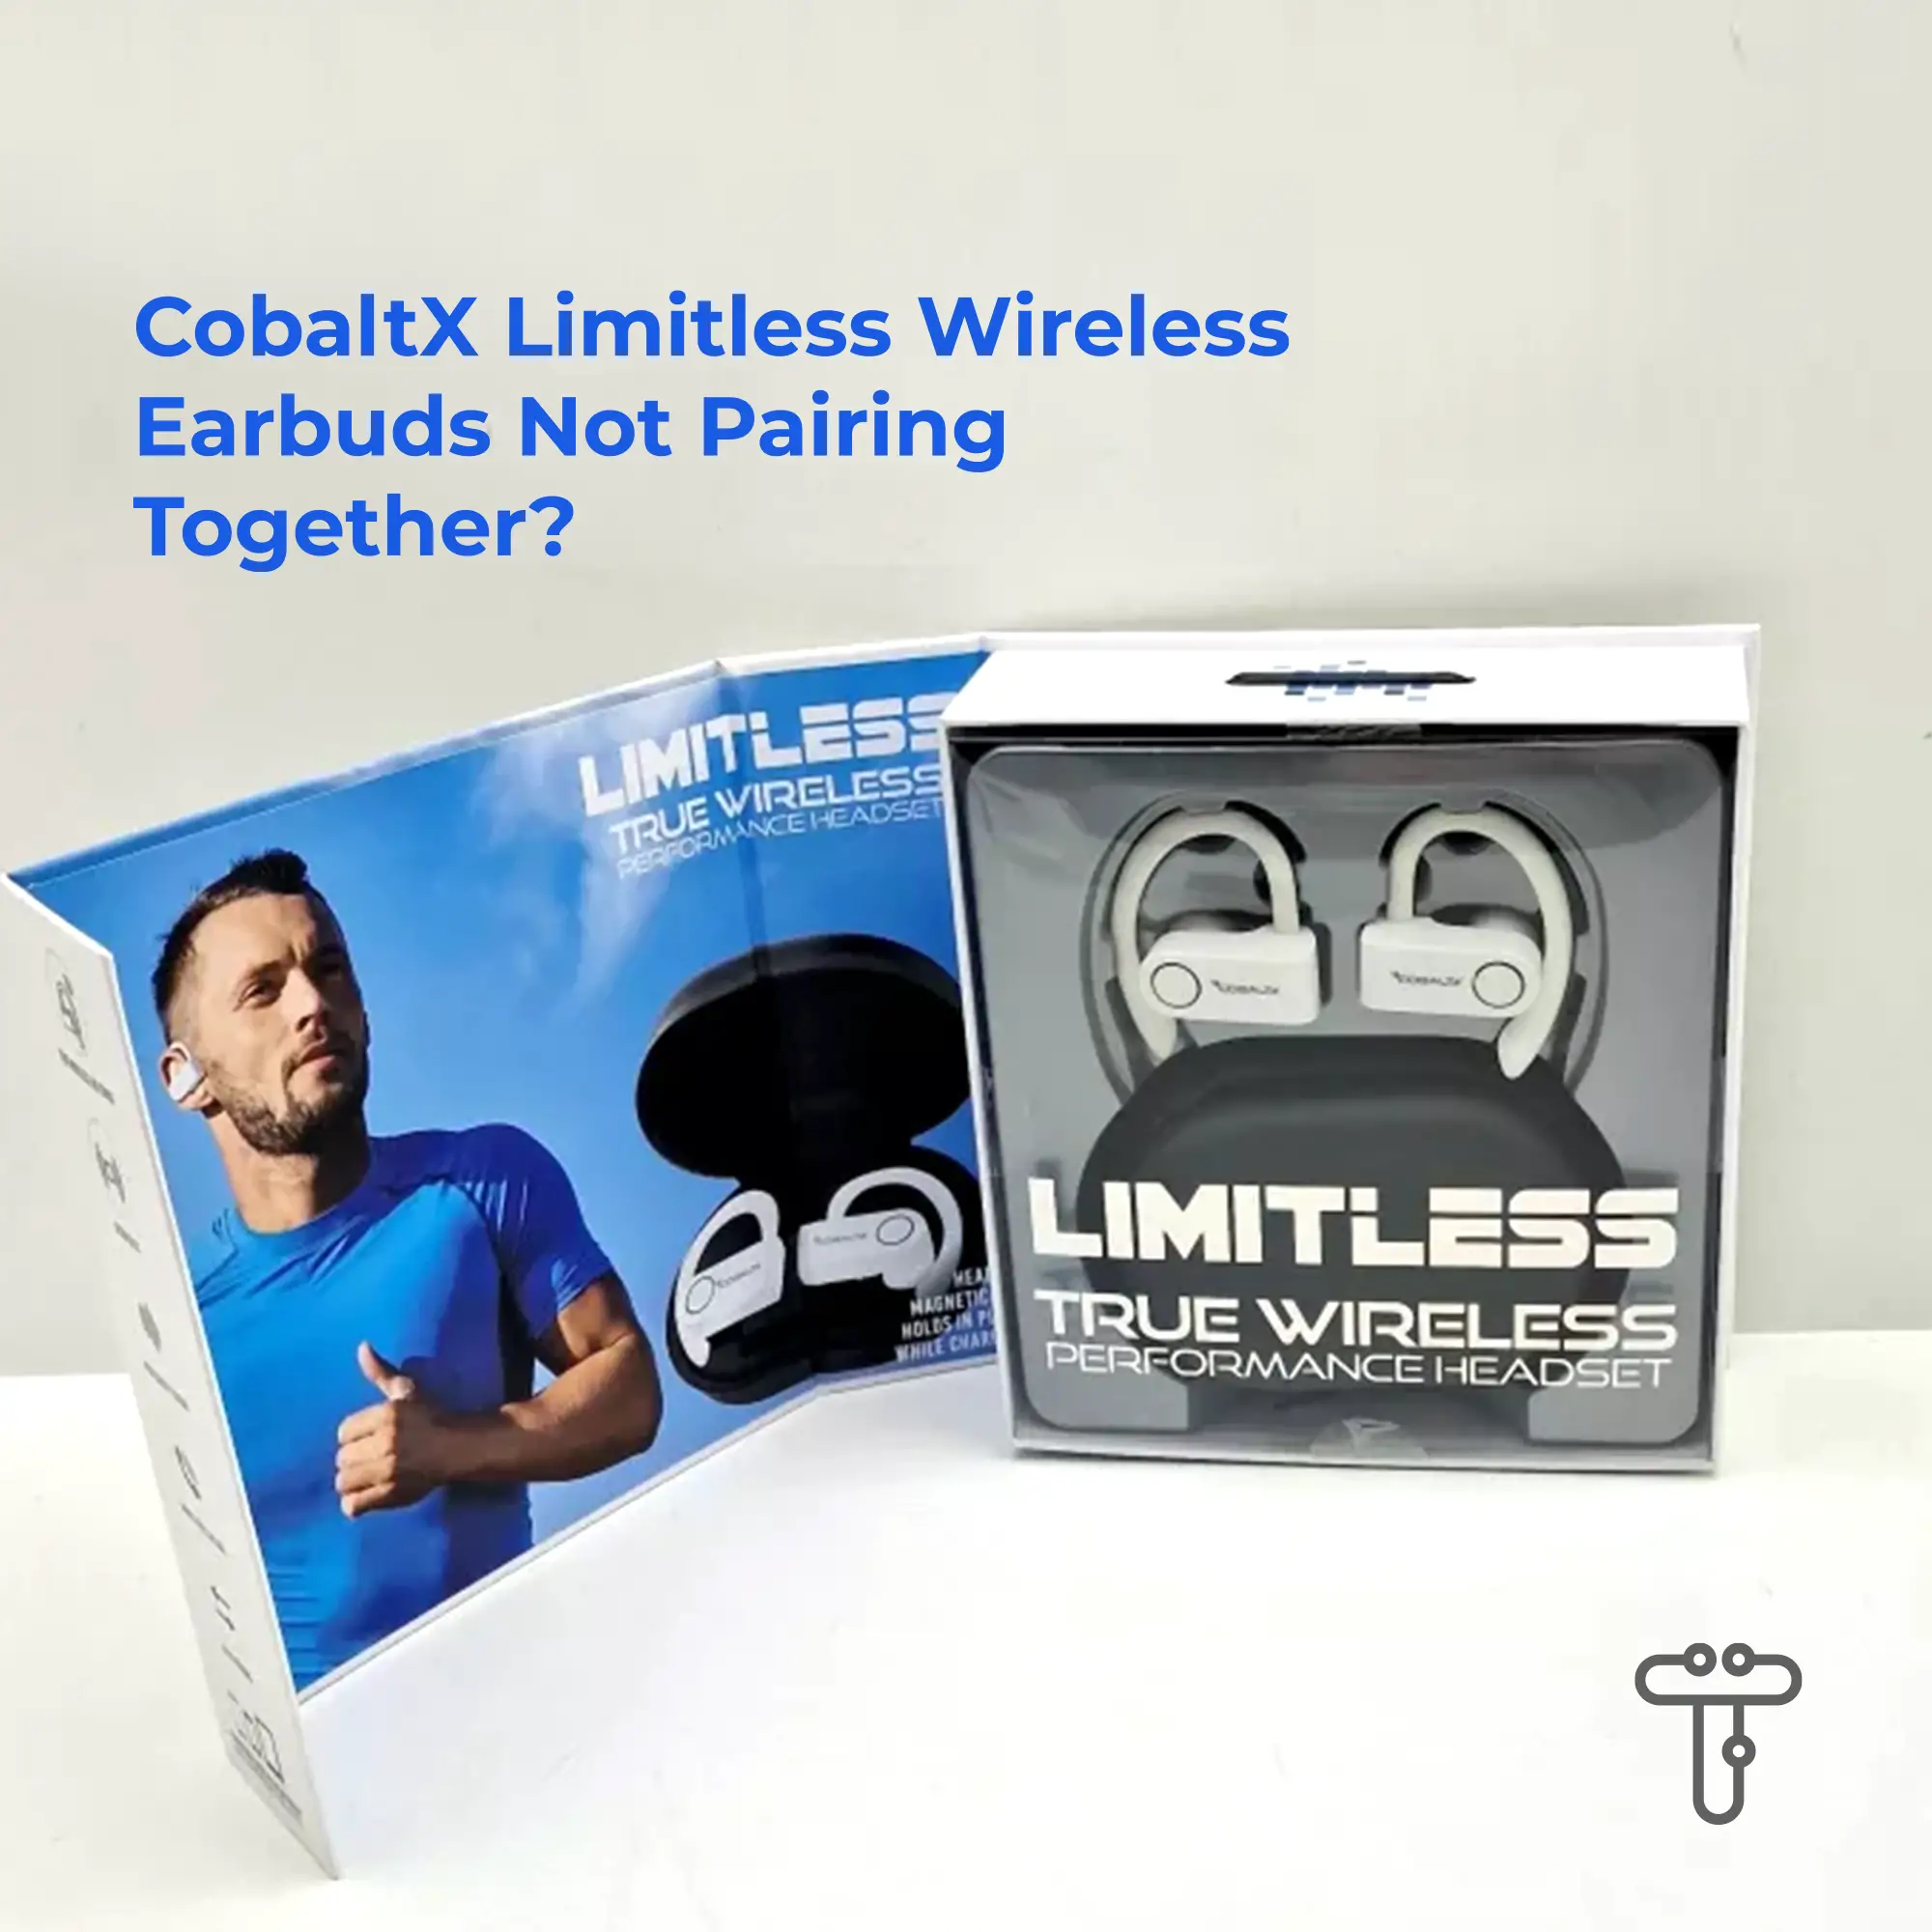 CobaltX Limitless Wireless Earbuds Not Pairing Together image 1 Techie Trickle